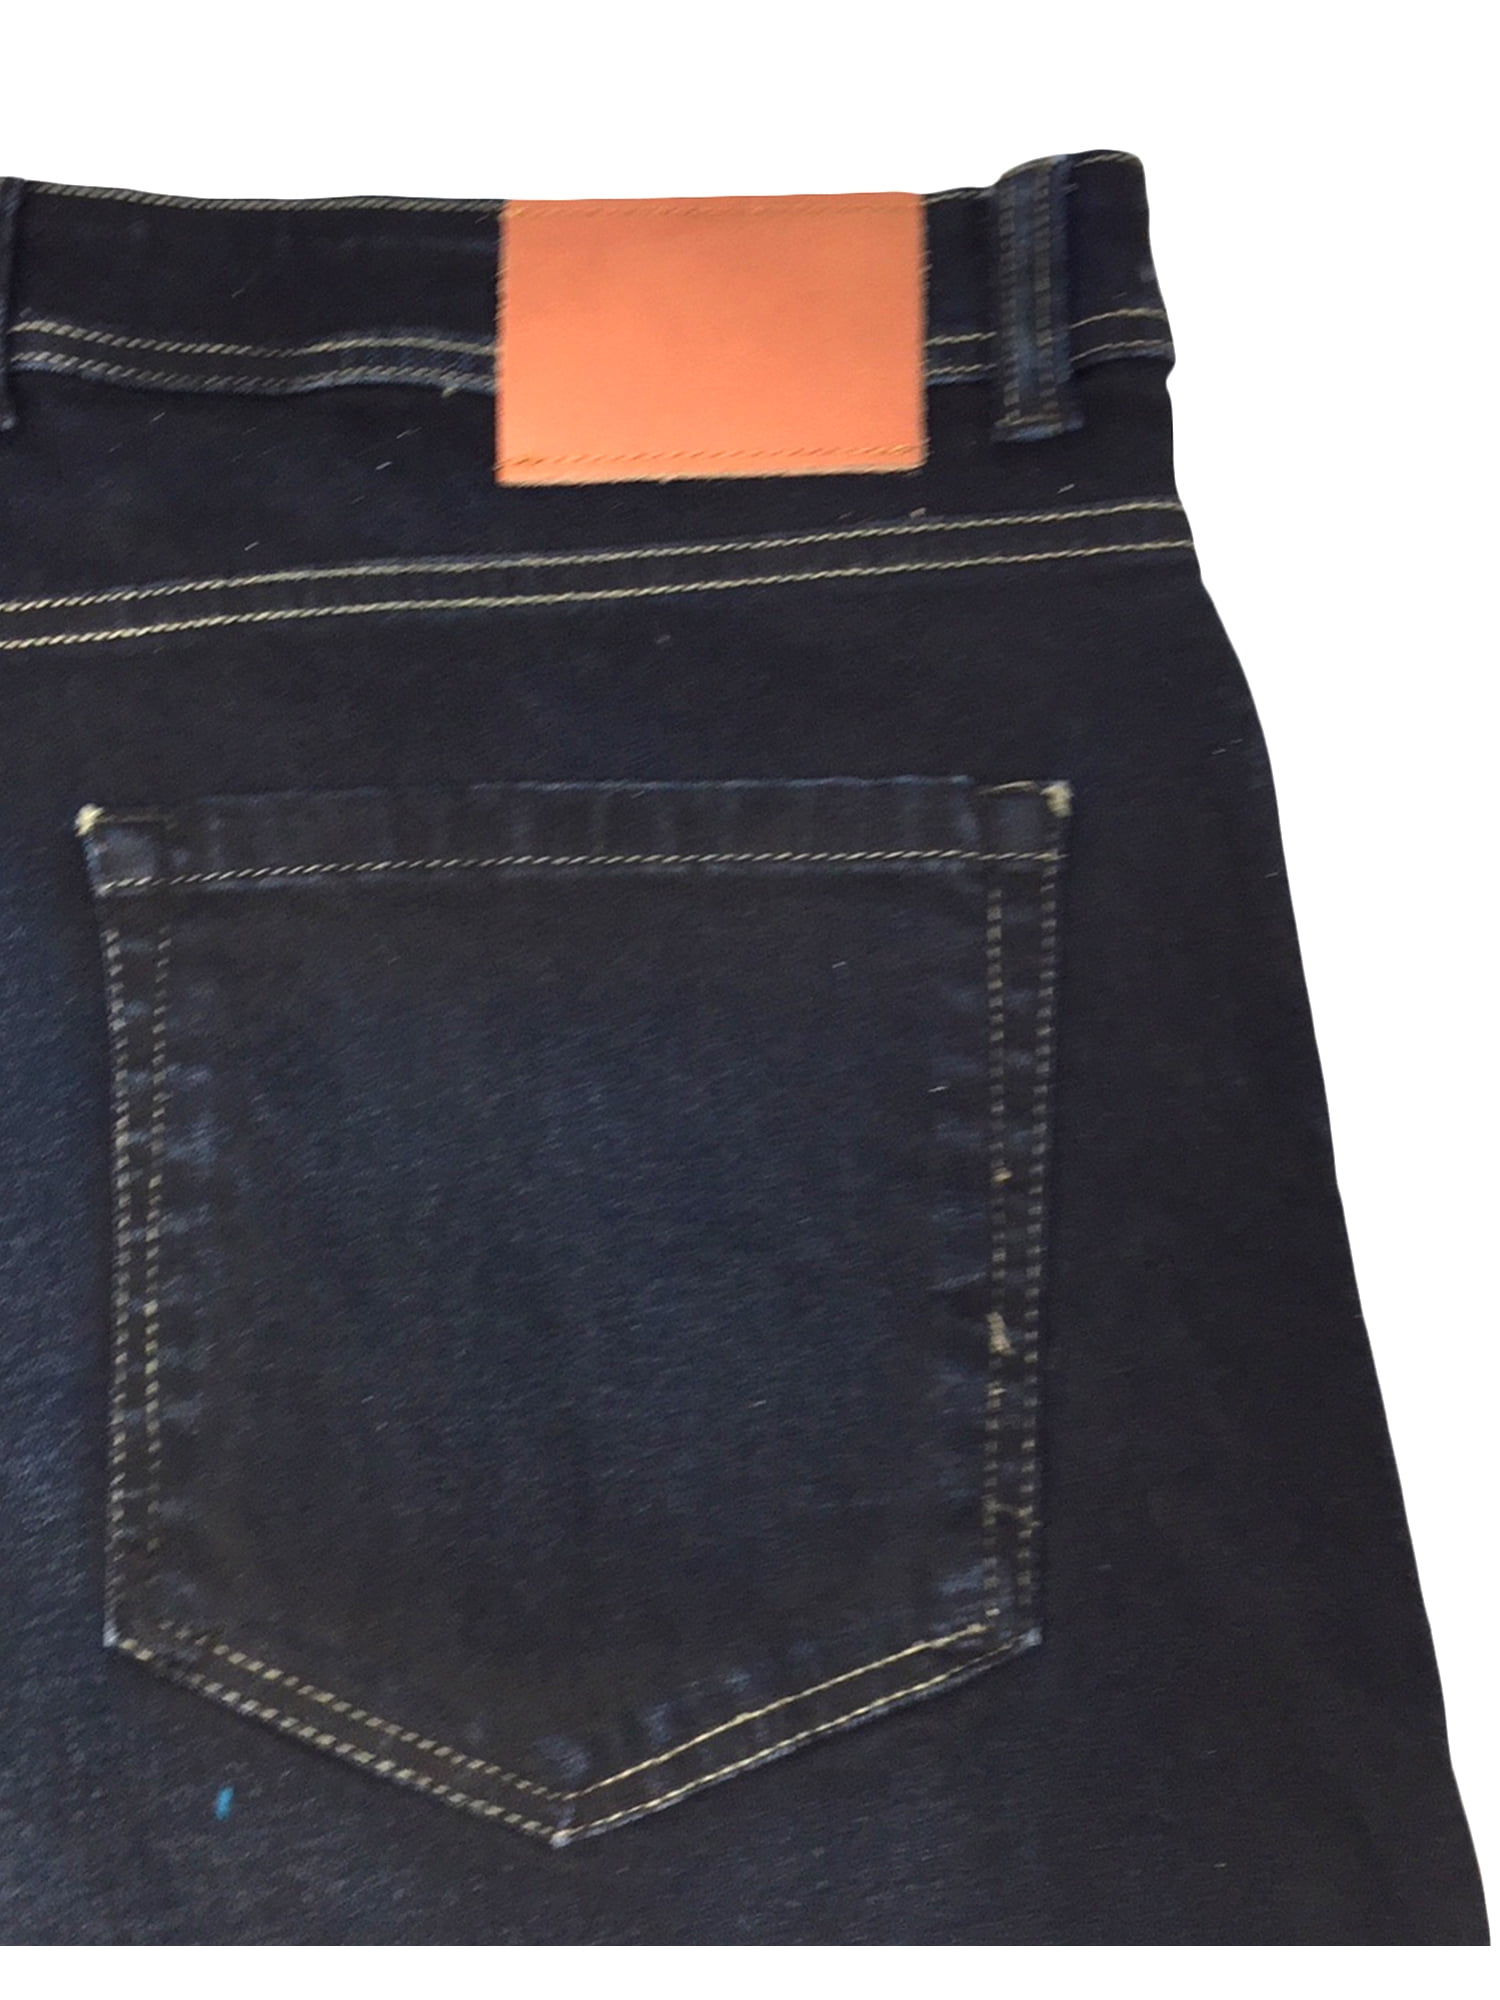 29 inch length mens jeans